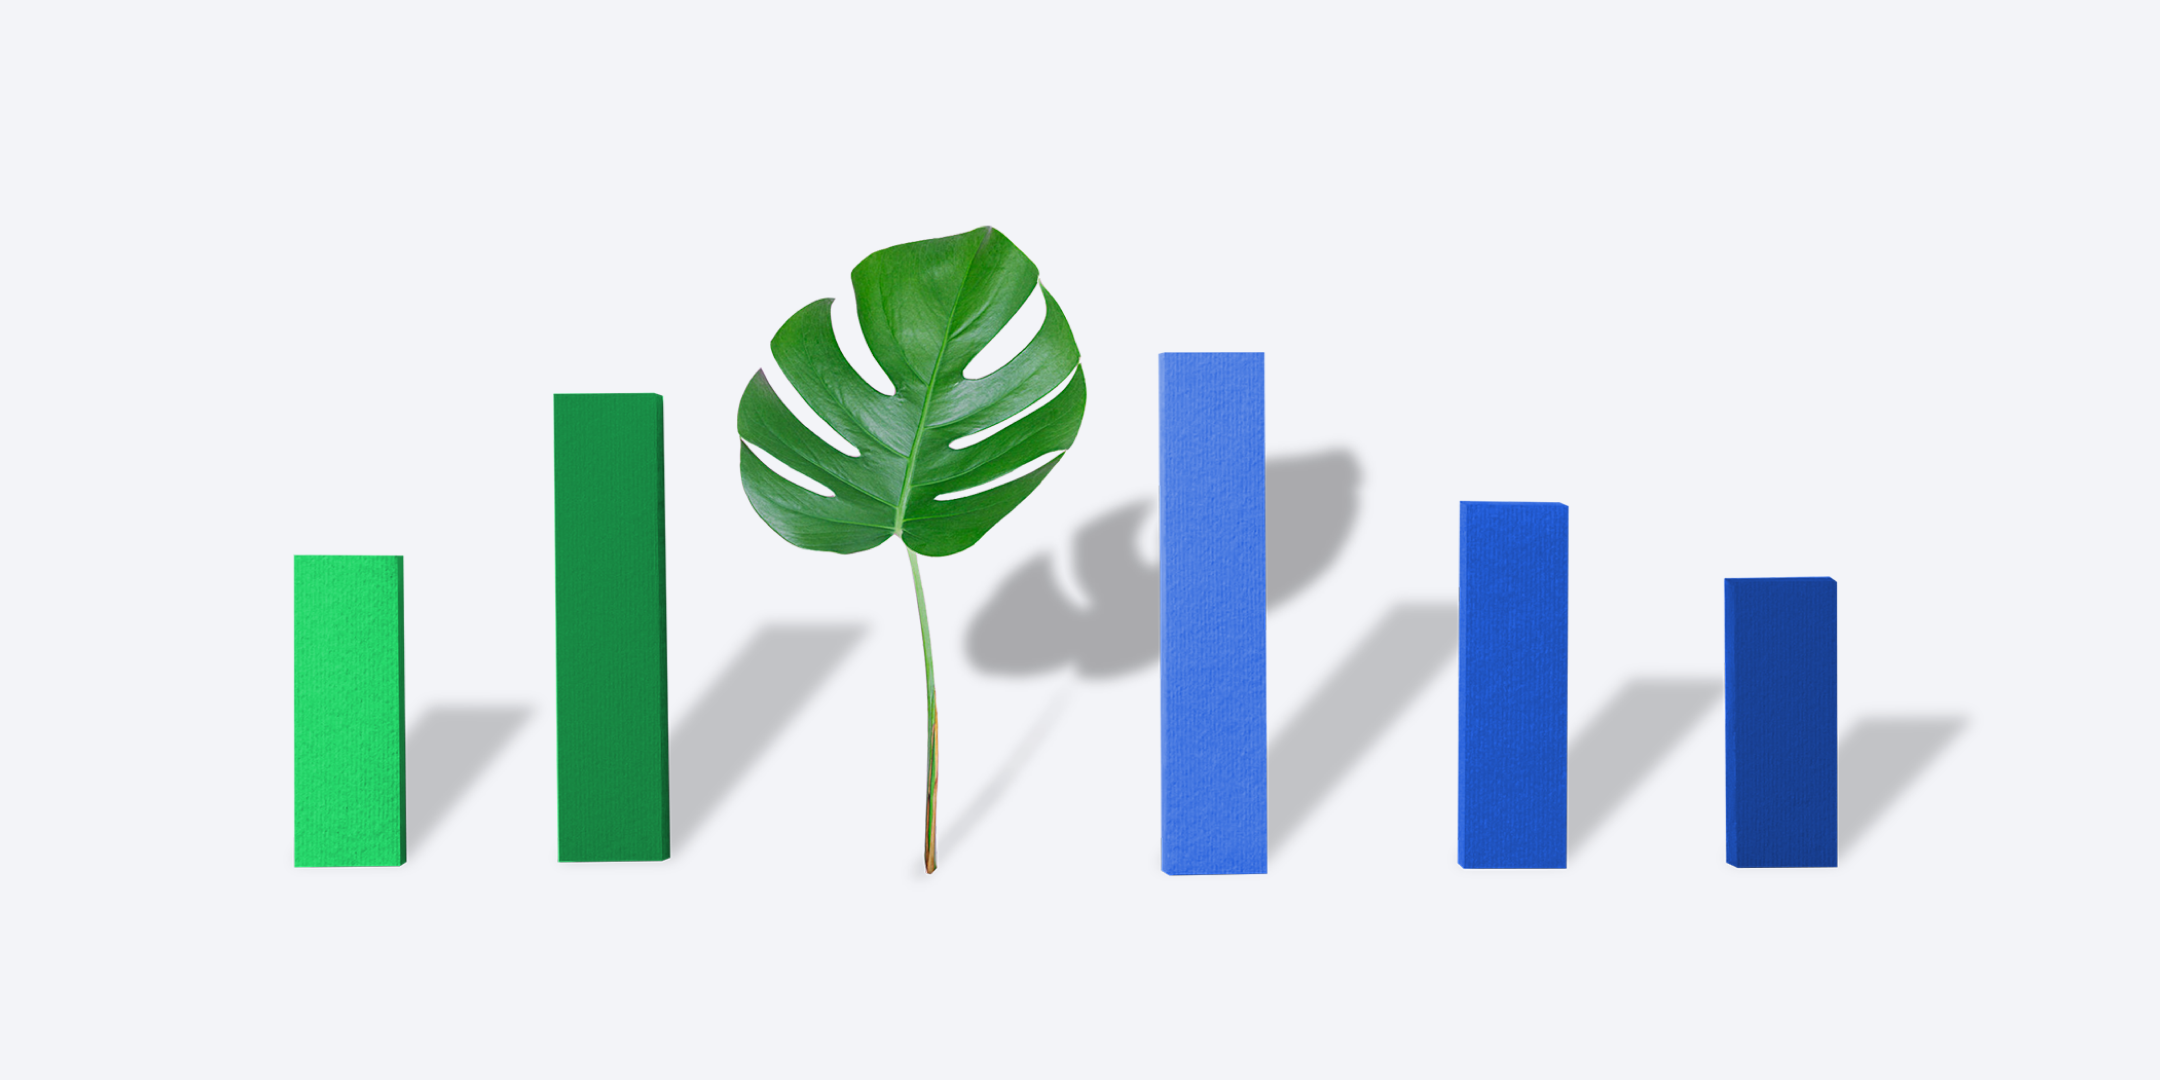 An illustration of a bar graph using a monstera leaf as one of the bars.